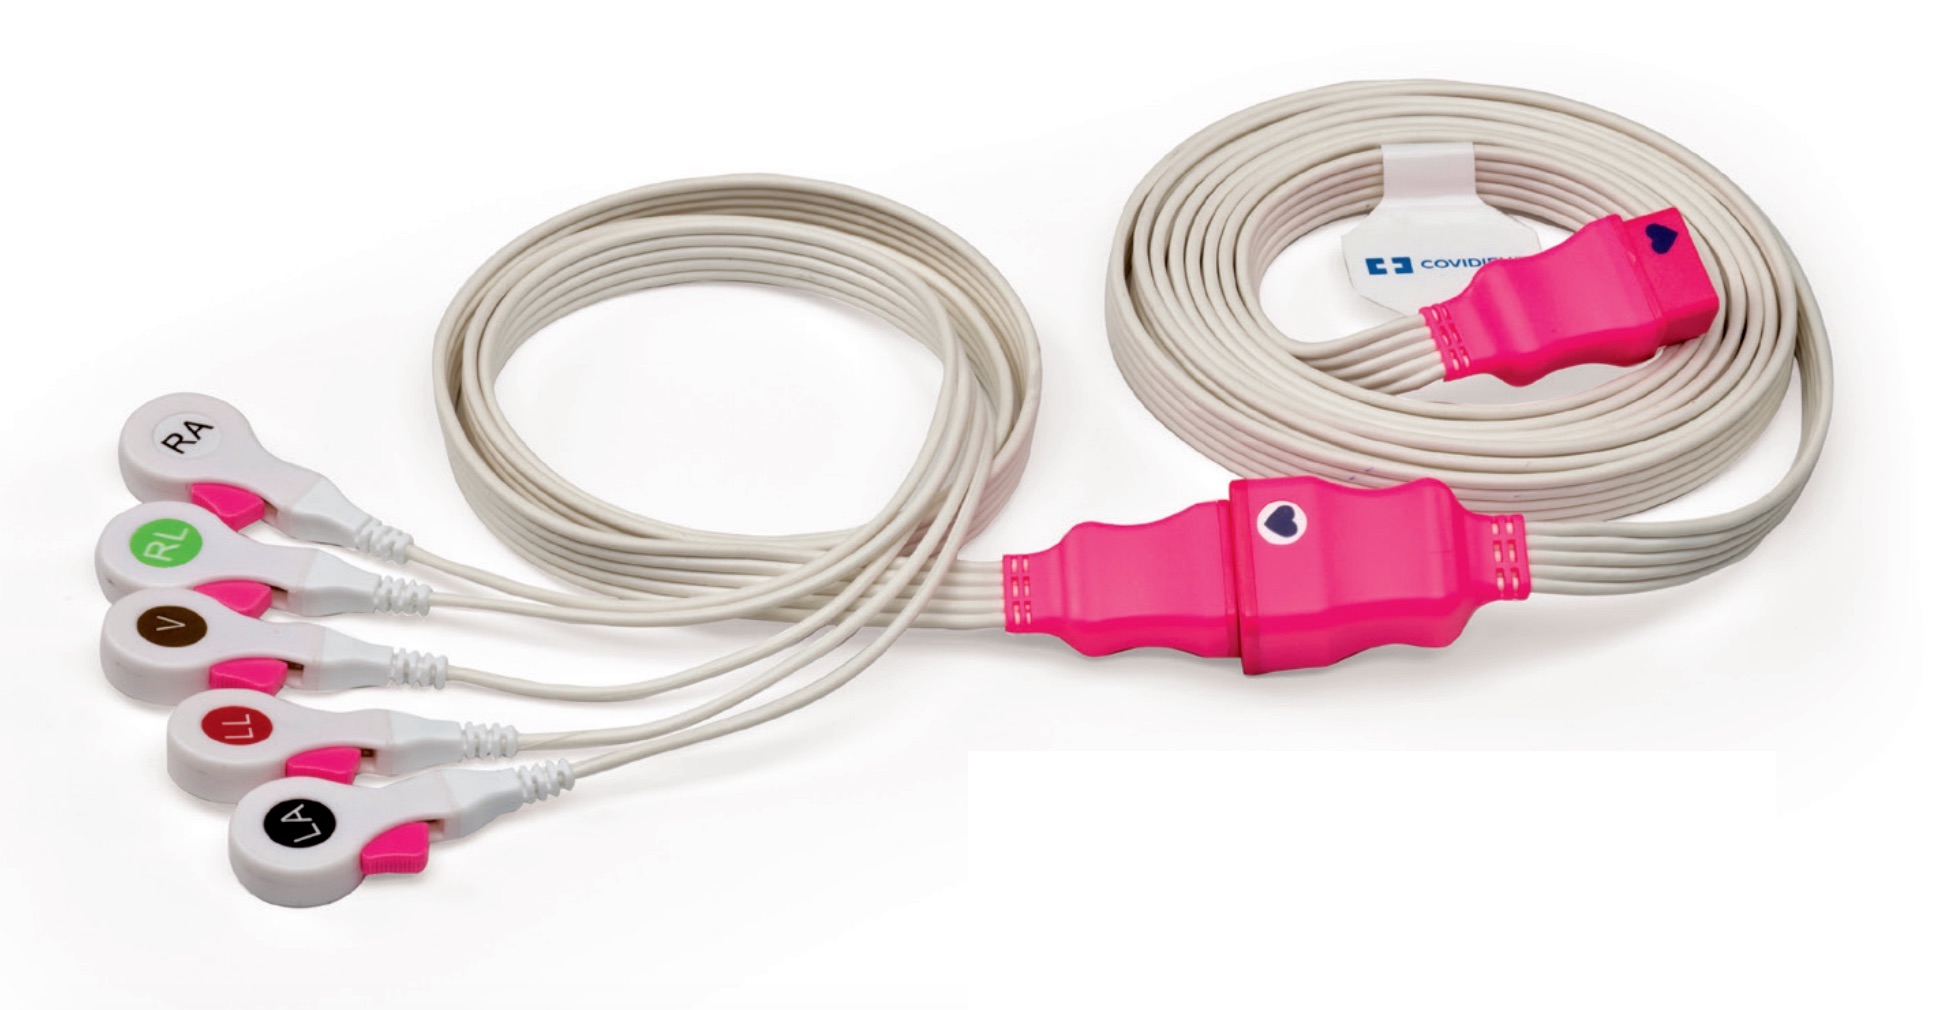 Kendall DL single-patient-use cable and lead wire system